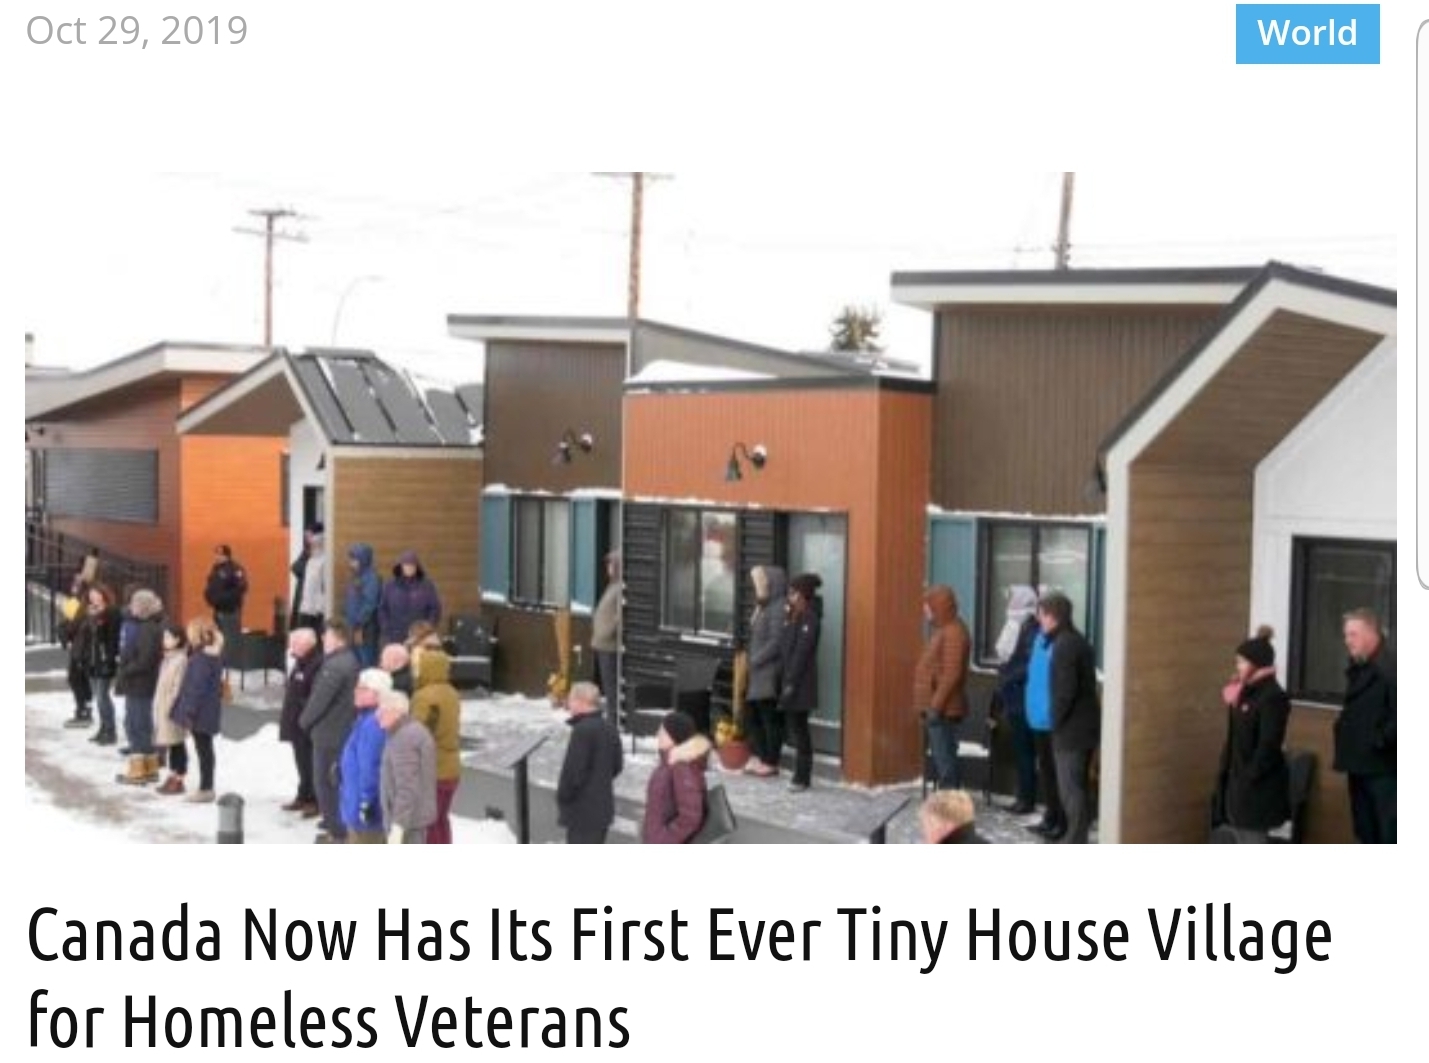 screenshot of an article titled "canada now has its first ever tiny village for homeless veterans" along with the featured image 